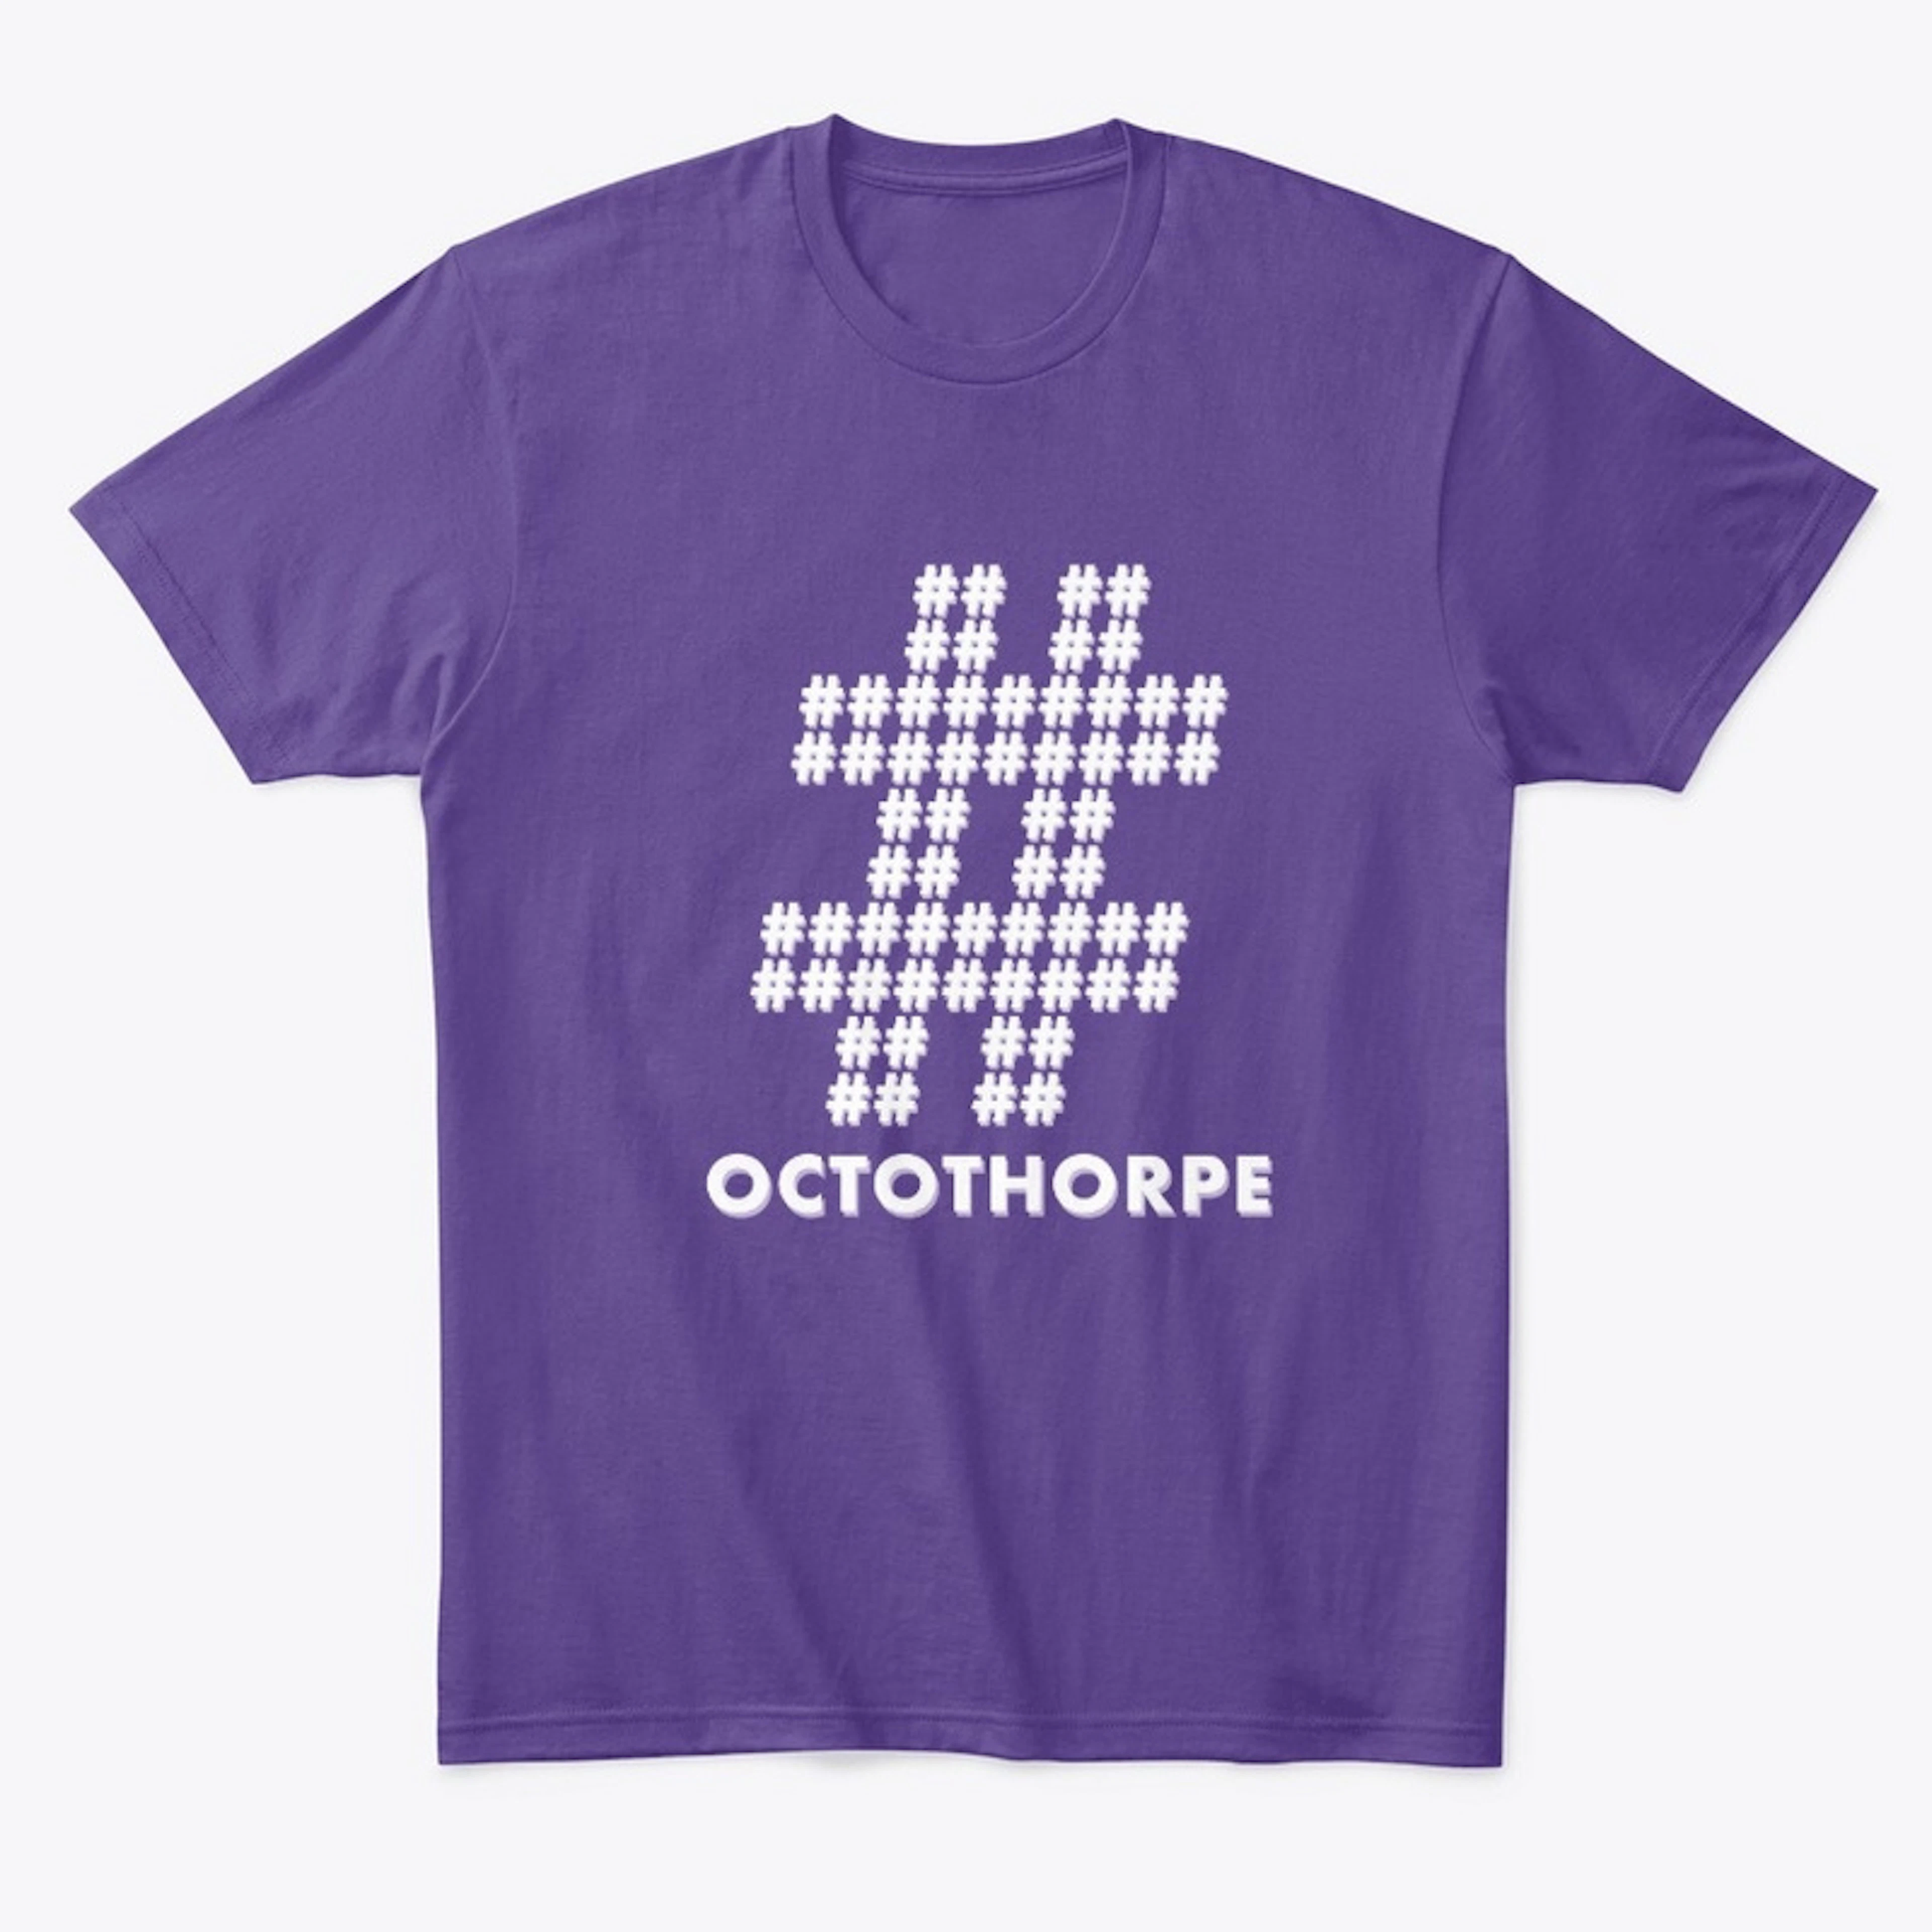 Octothorpe the Podcast